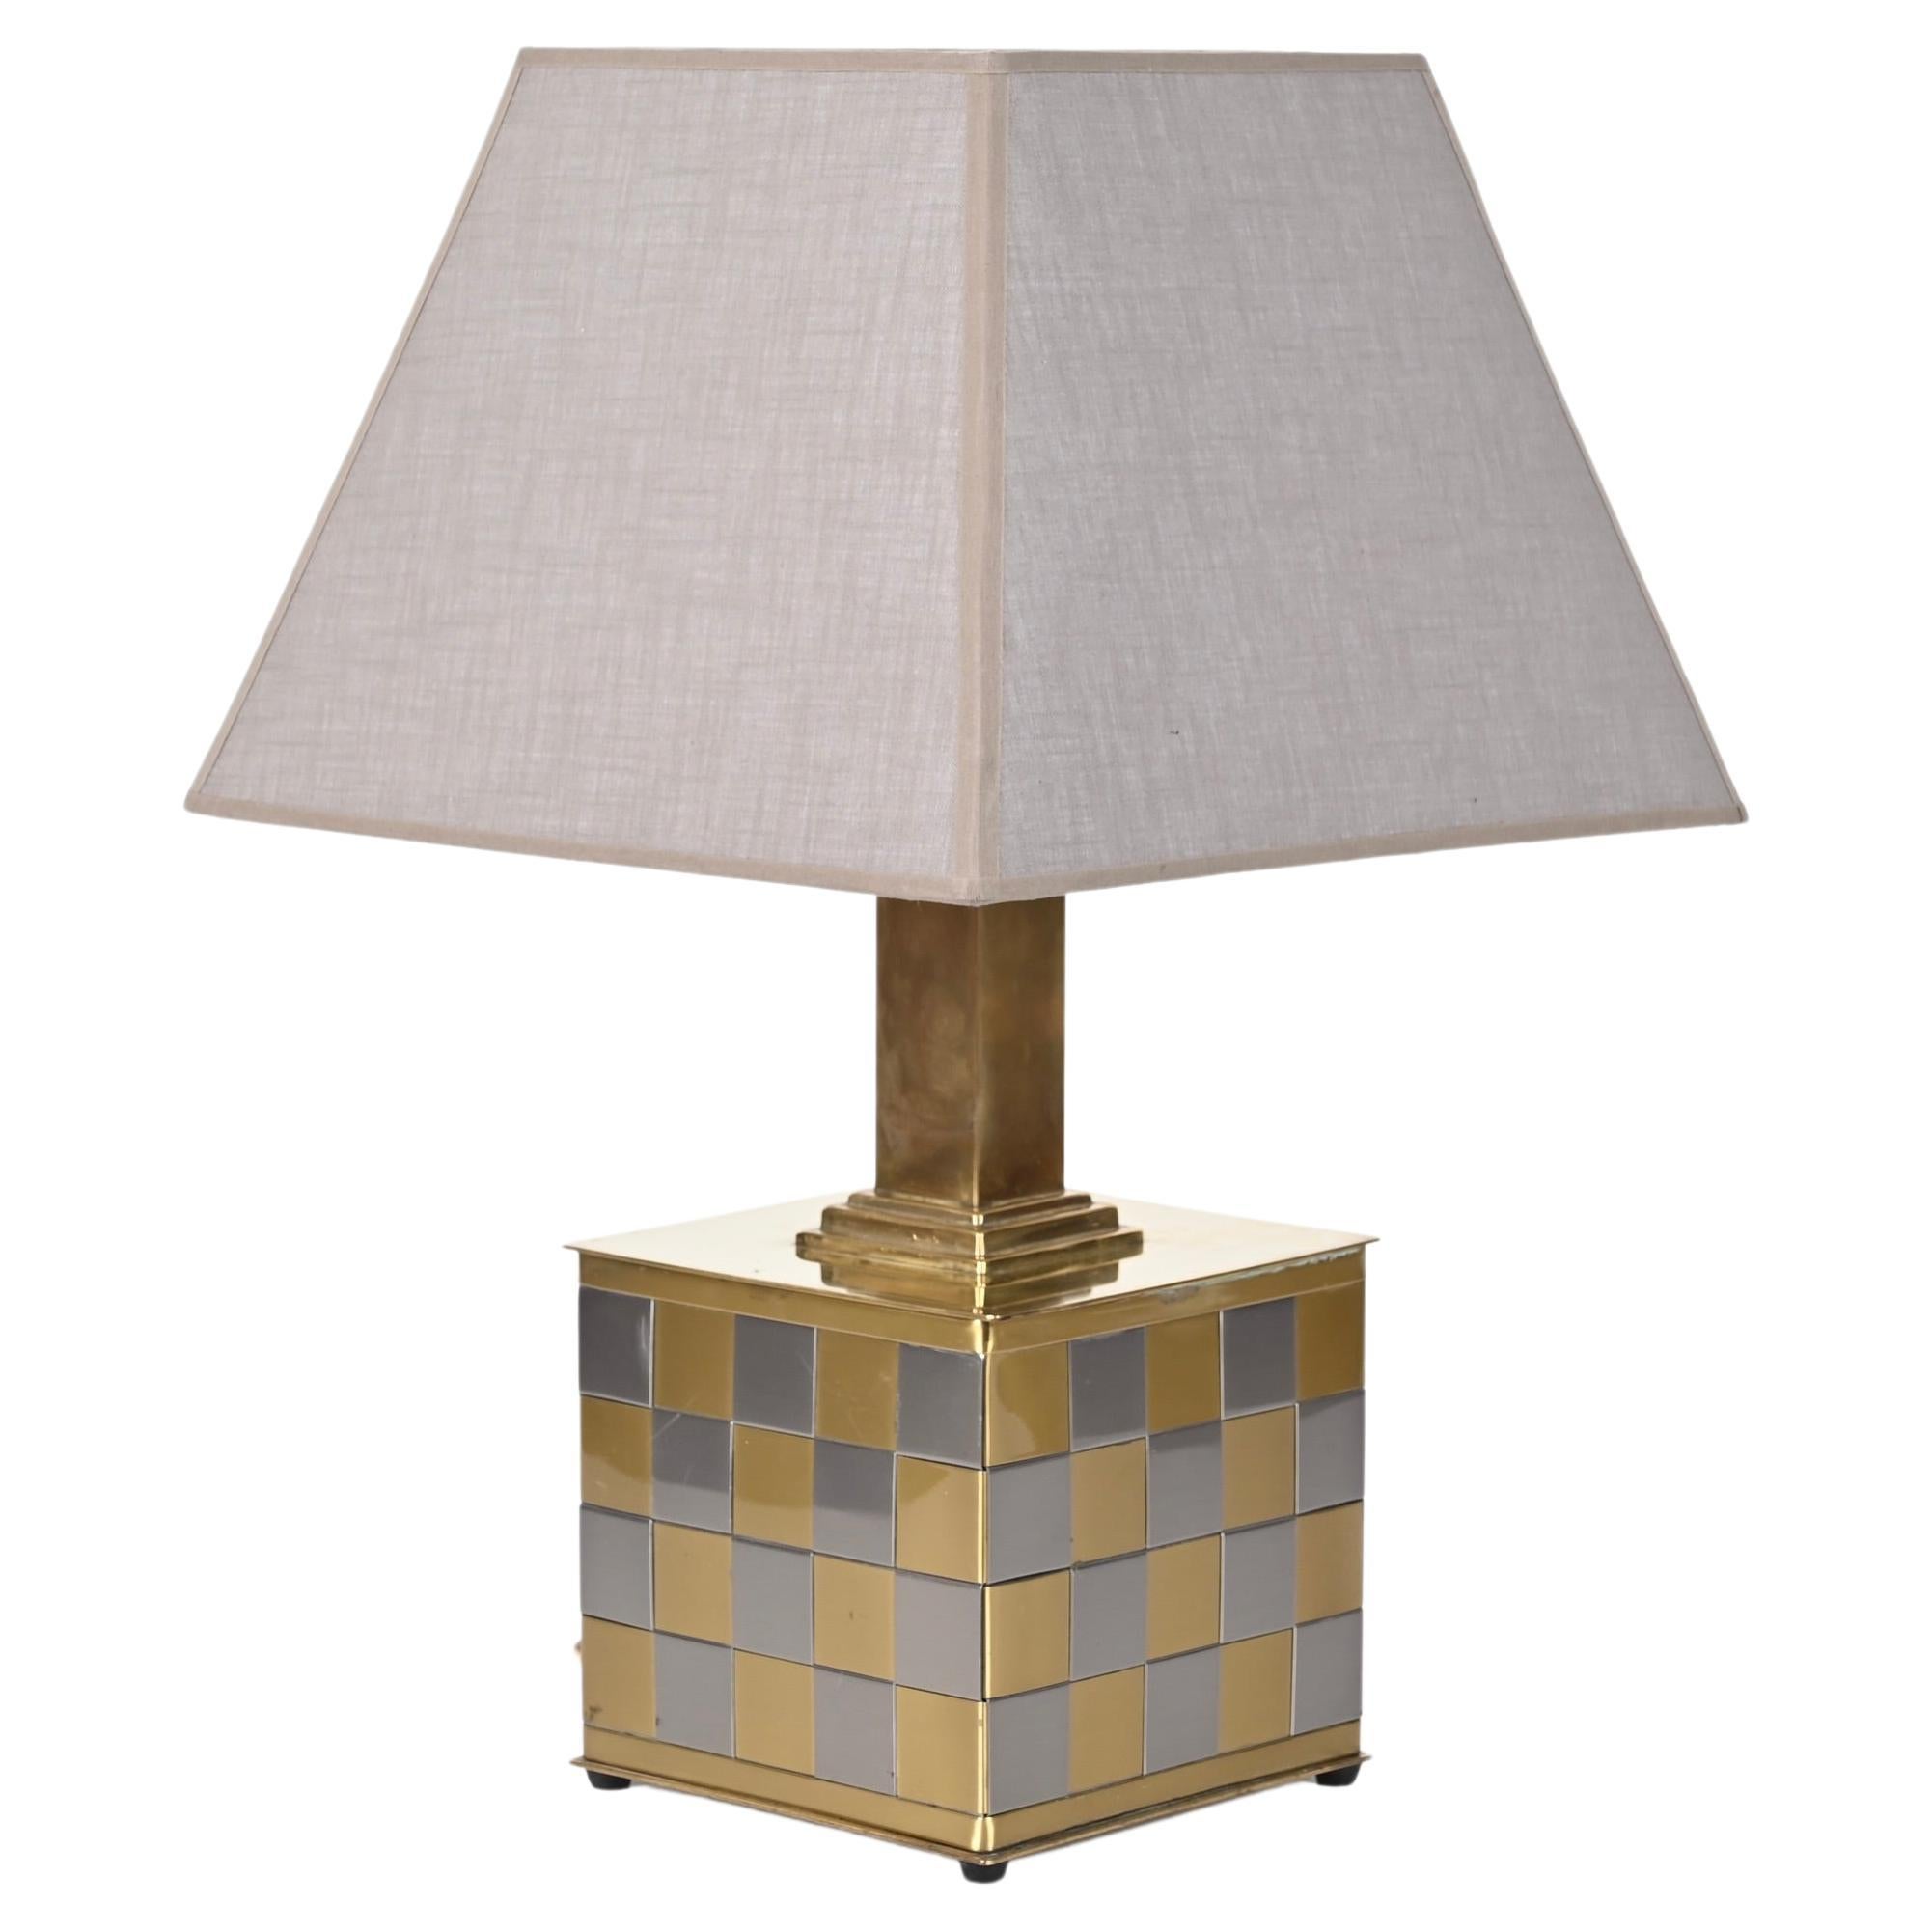 Midcentury Brass and Chrome Table Lamp, Willy Rizzo, Italy 1970s For Sale